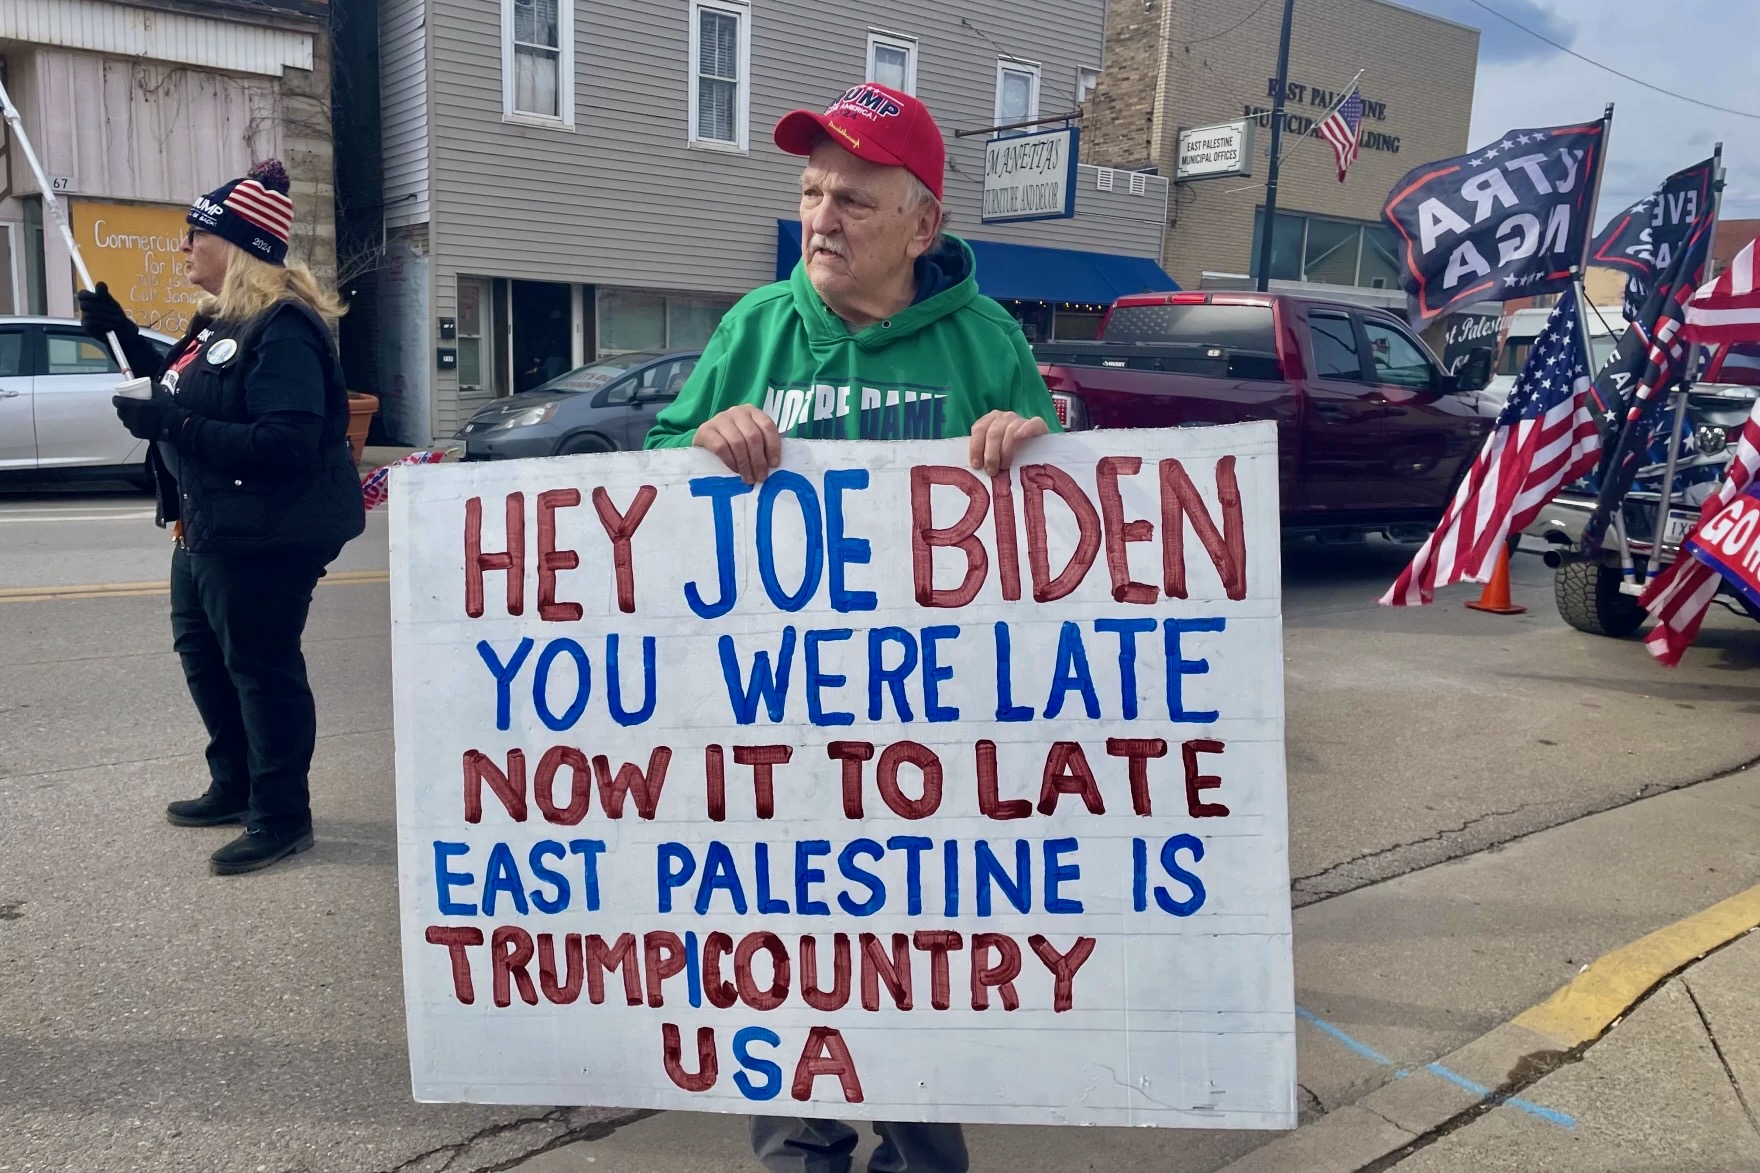 Don Skowron, wearing a red MAGA hat, stands on the street with a sign that reads, "Hey Joe Biden. You were late. Now it's too late. East Palestine is Trump country U.S.A.," in Downtown East Palestine.